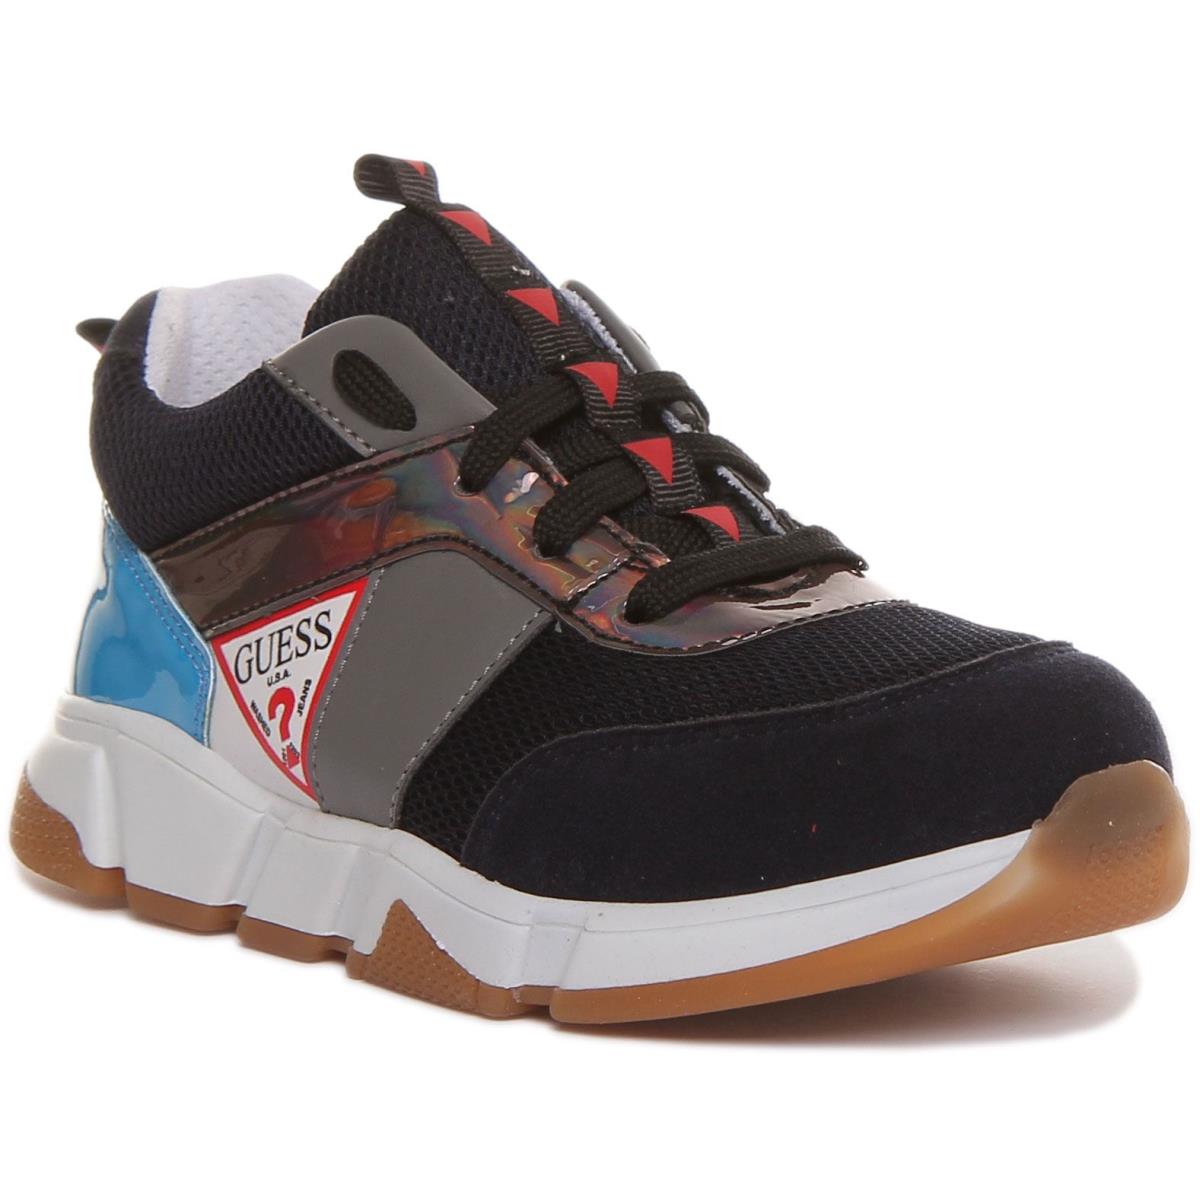 Guess Ricky Lace up Kids Running Influenced Trainer Black Blue Size US 8 - 2 BLACK BLUE